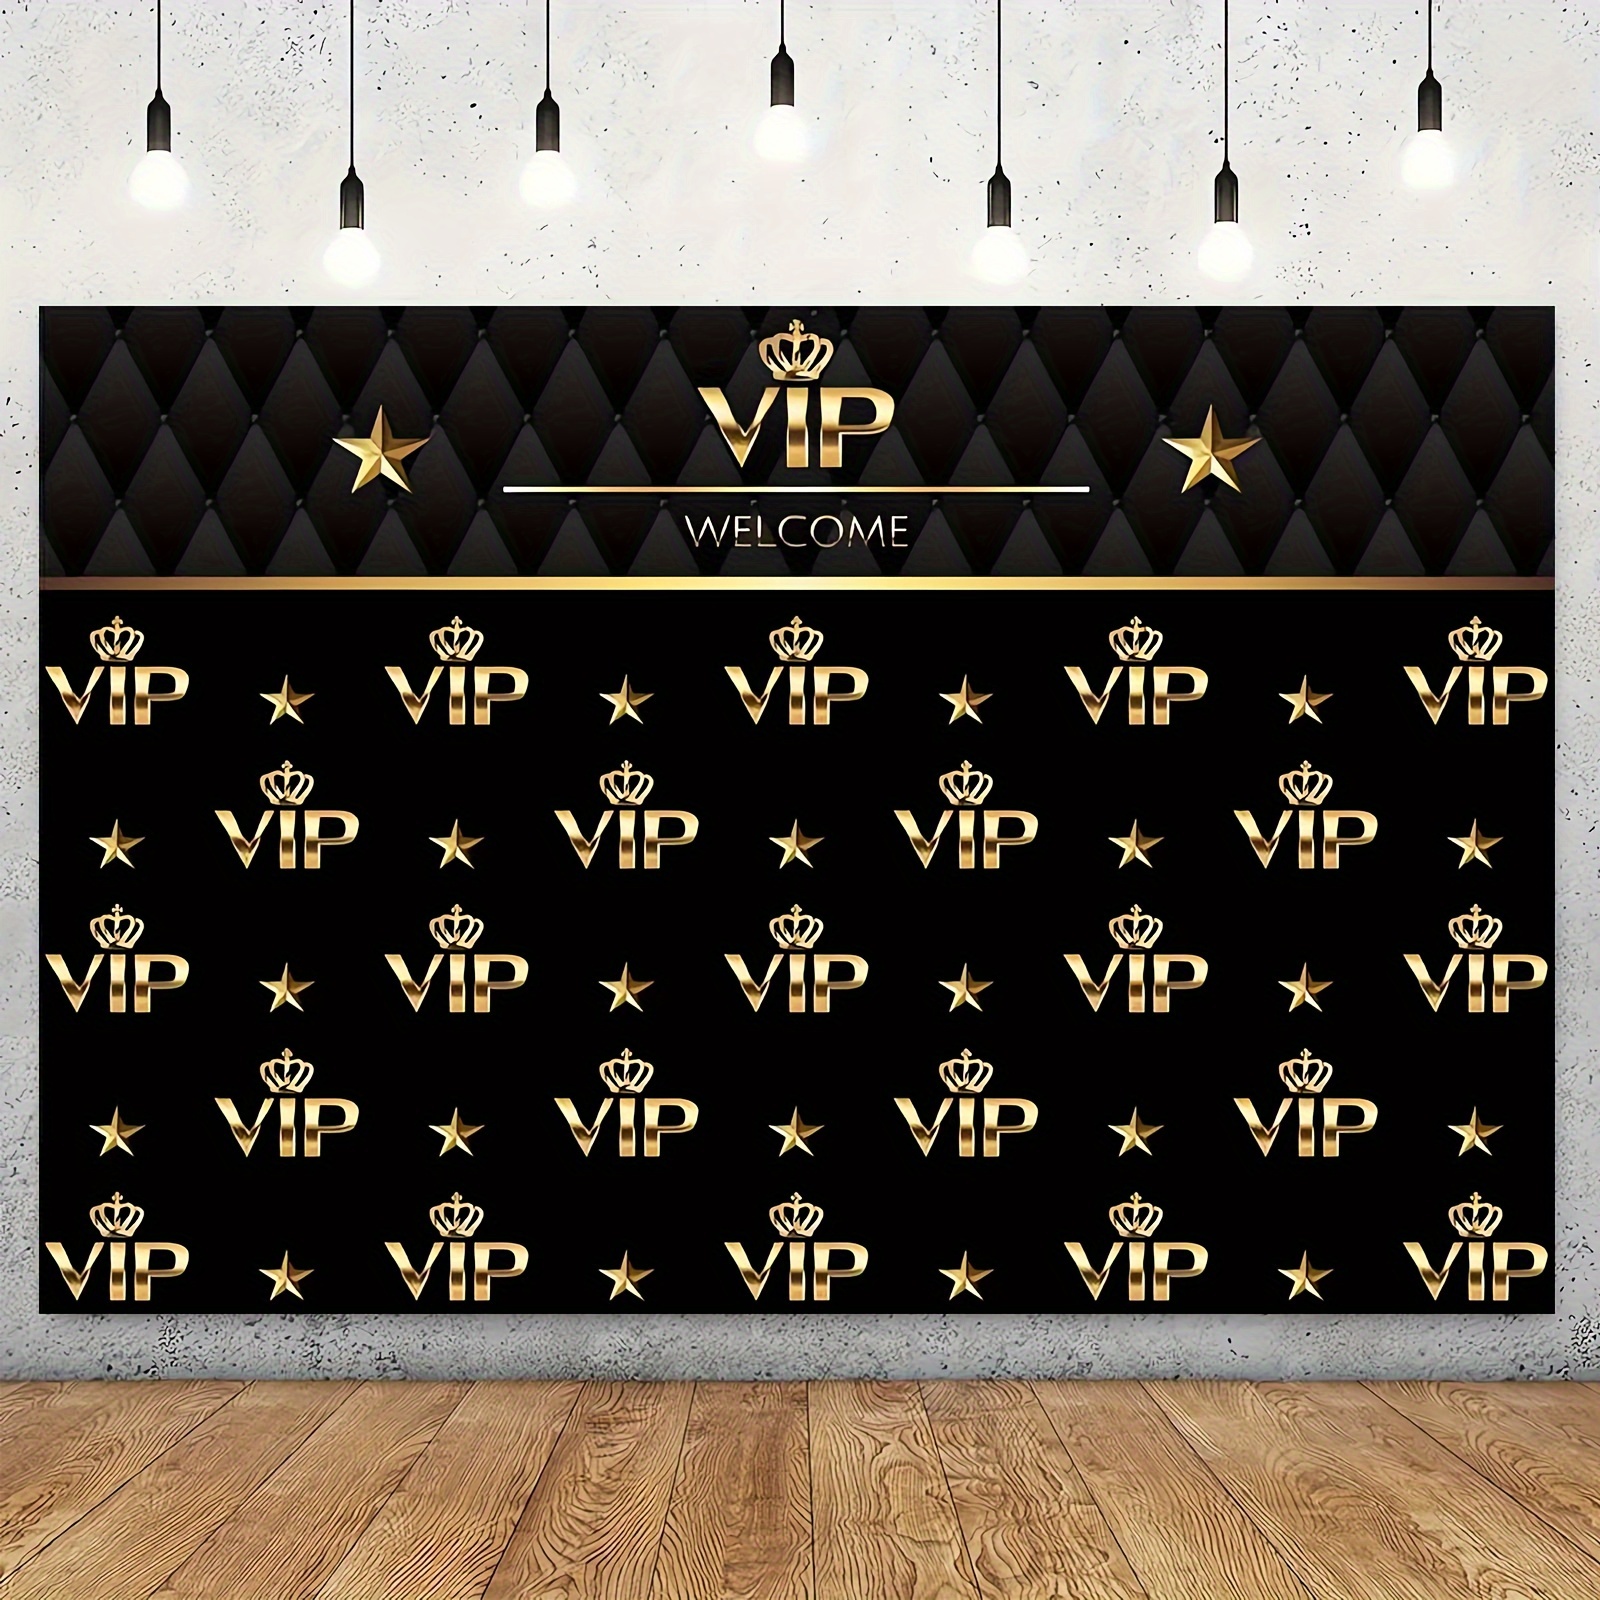 1pc photography backdrop vip red carpet event backdrop for photography royal crown gold background step and repeat vip logo movie ceremony birthday party shower decorations celebrity photo booth props 51 59inch 70 8 90 5inch